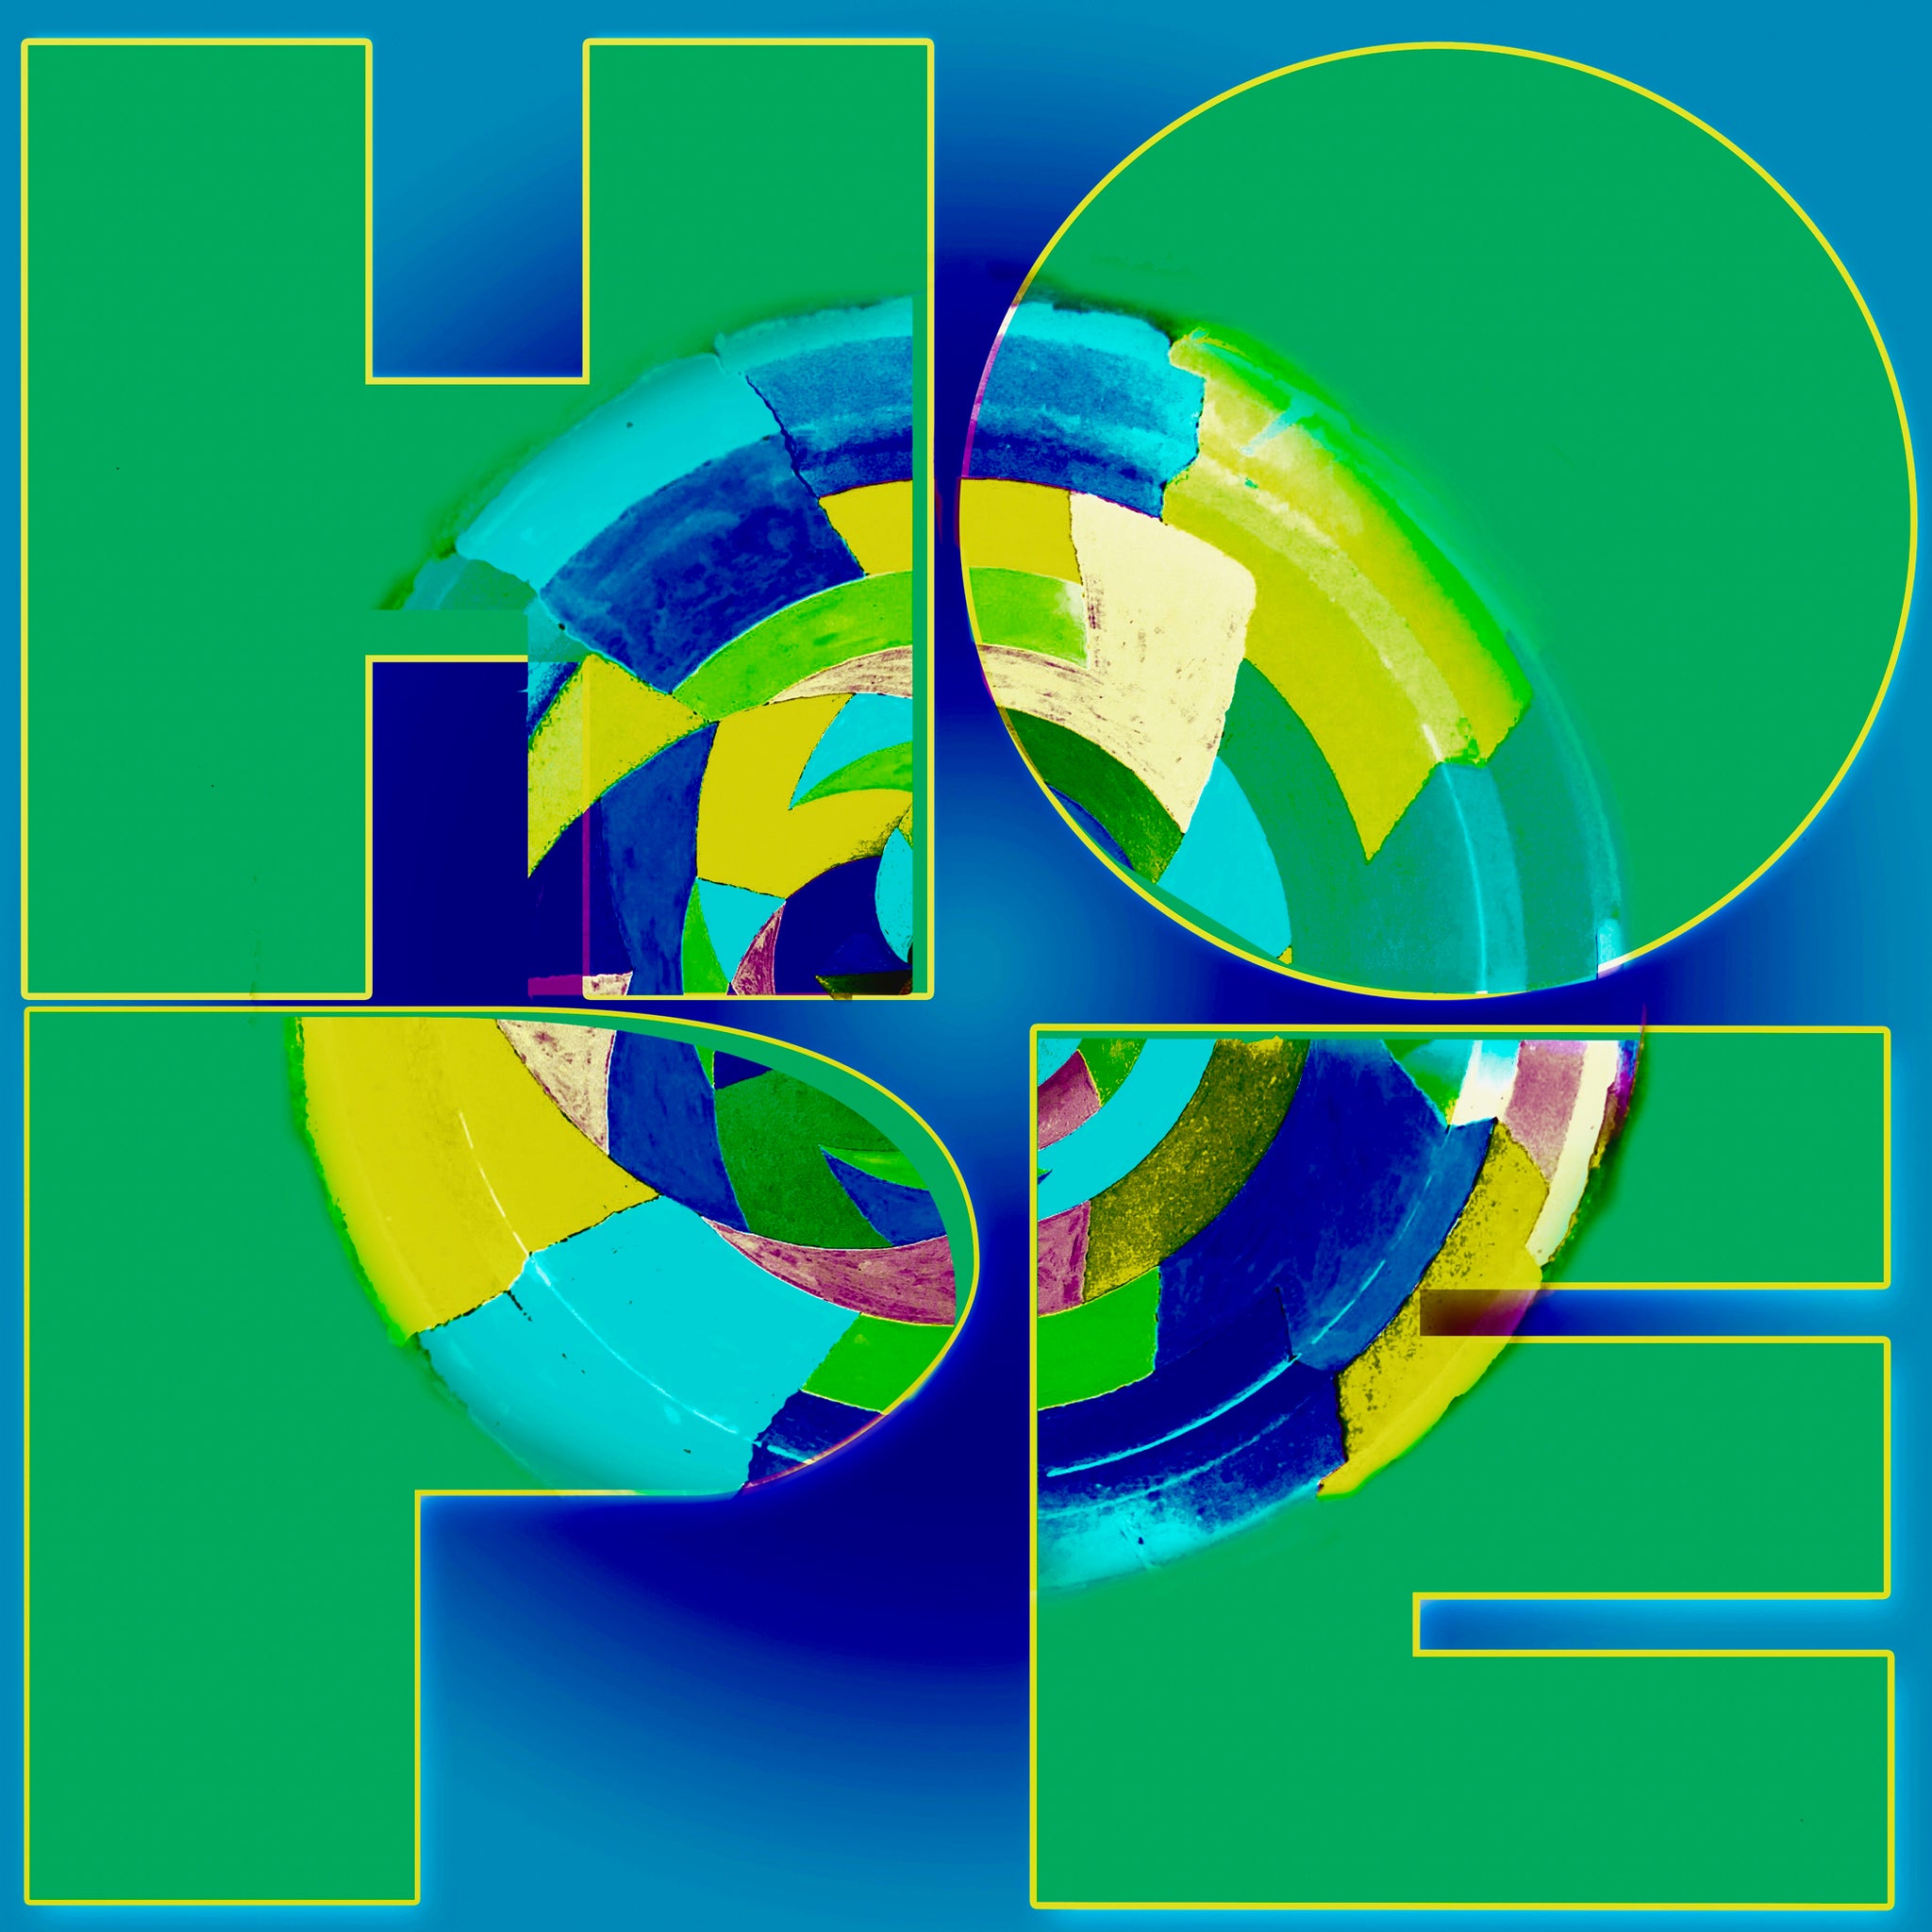 Ode to Robert Indiana: Hope Versions 1-2-3